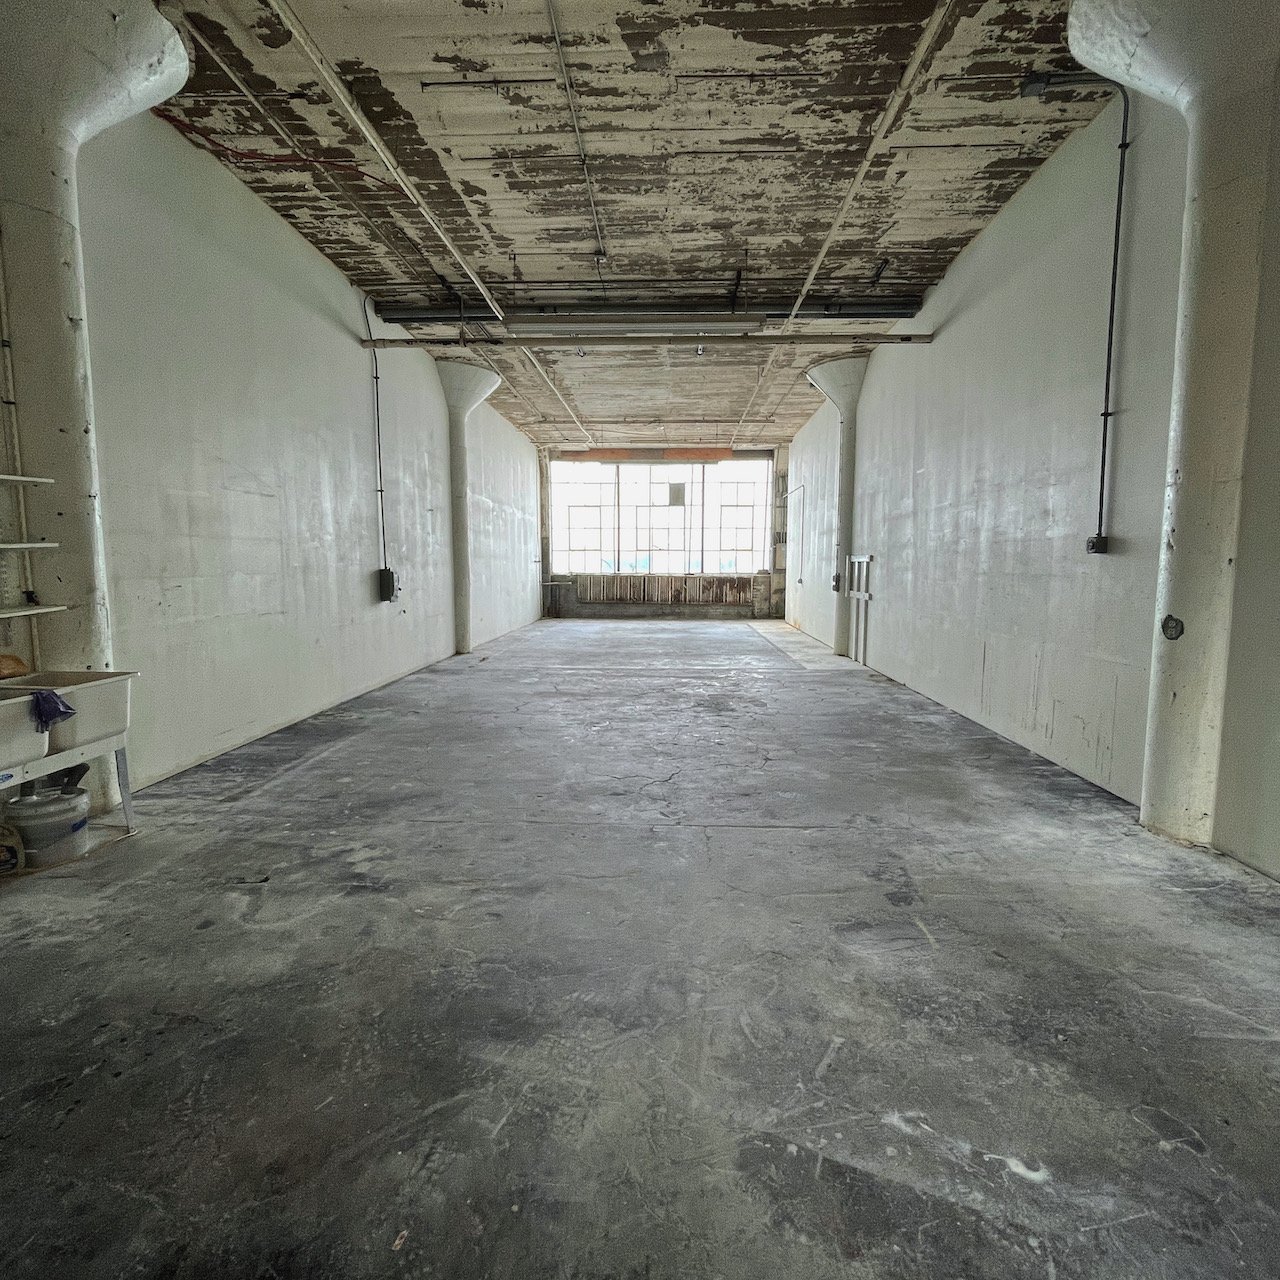  An image of empty warehouse where Lauren HB Studio will display and create their artowrk 